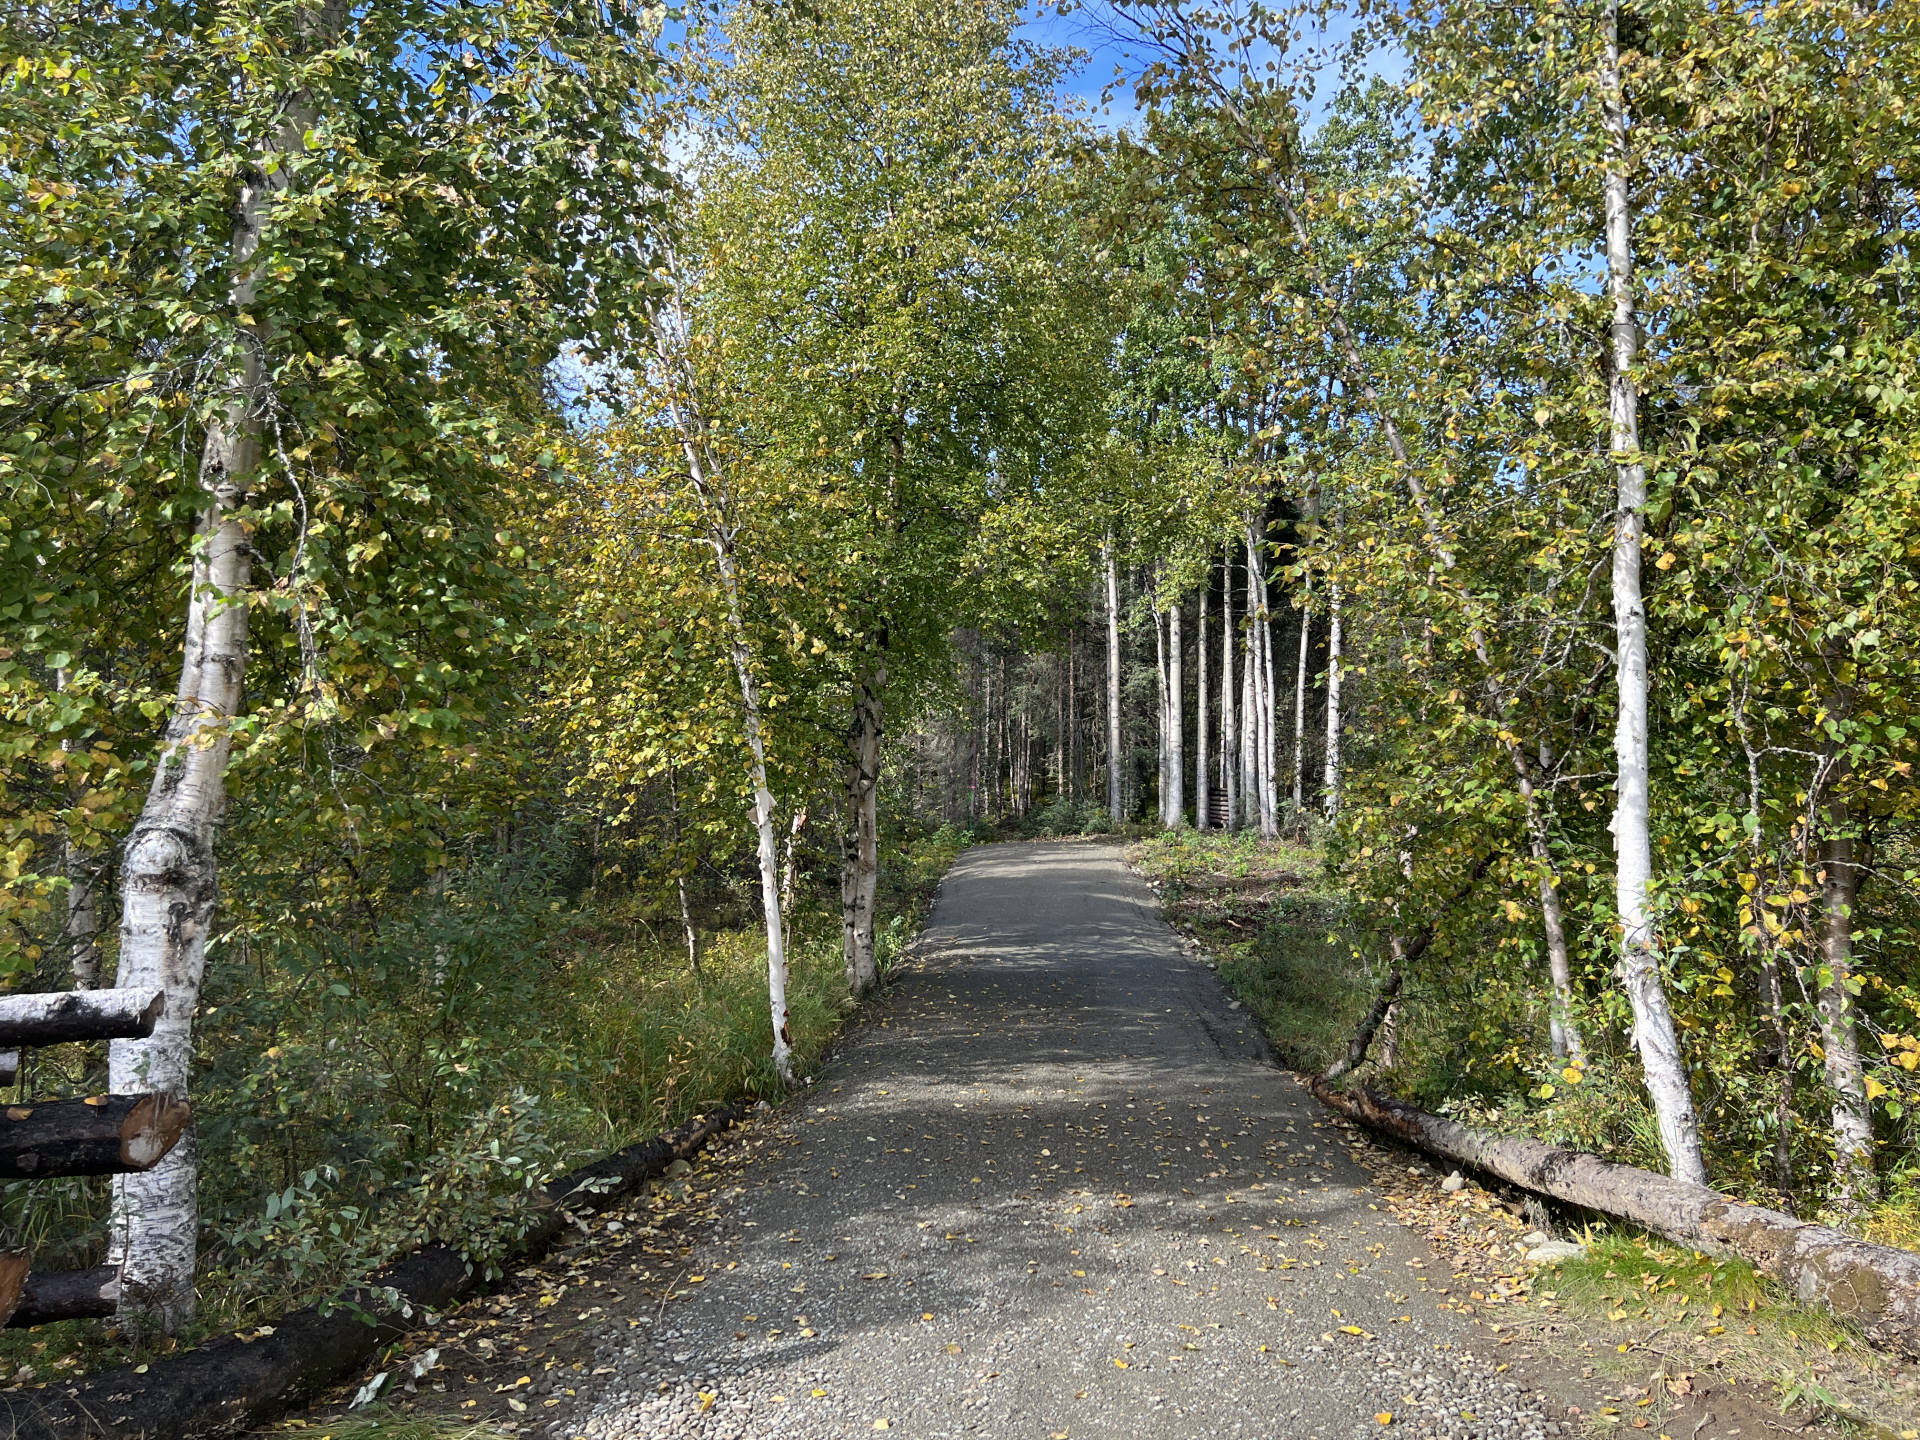 This is another lane for a walk to the red alder oasis. It is possible to park here if guests arrived in more than 45-50 cars and they did not have enough space in other parking lots.